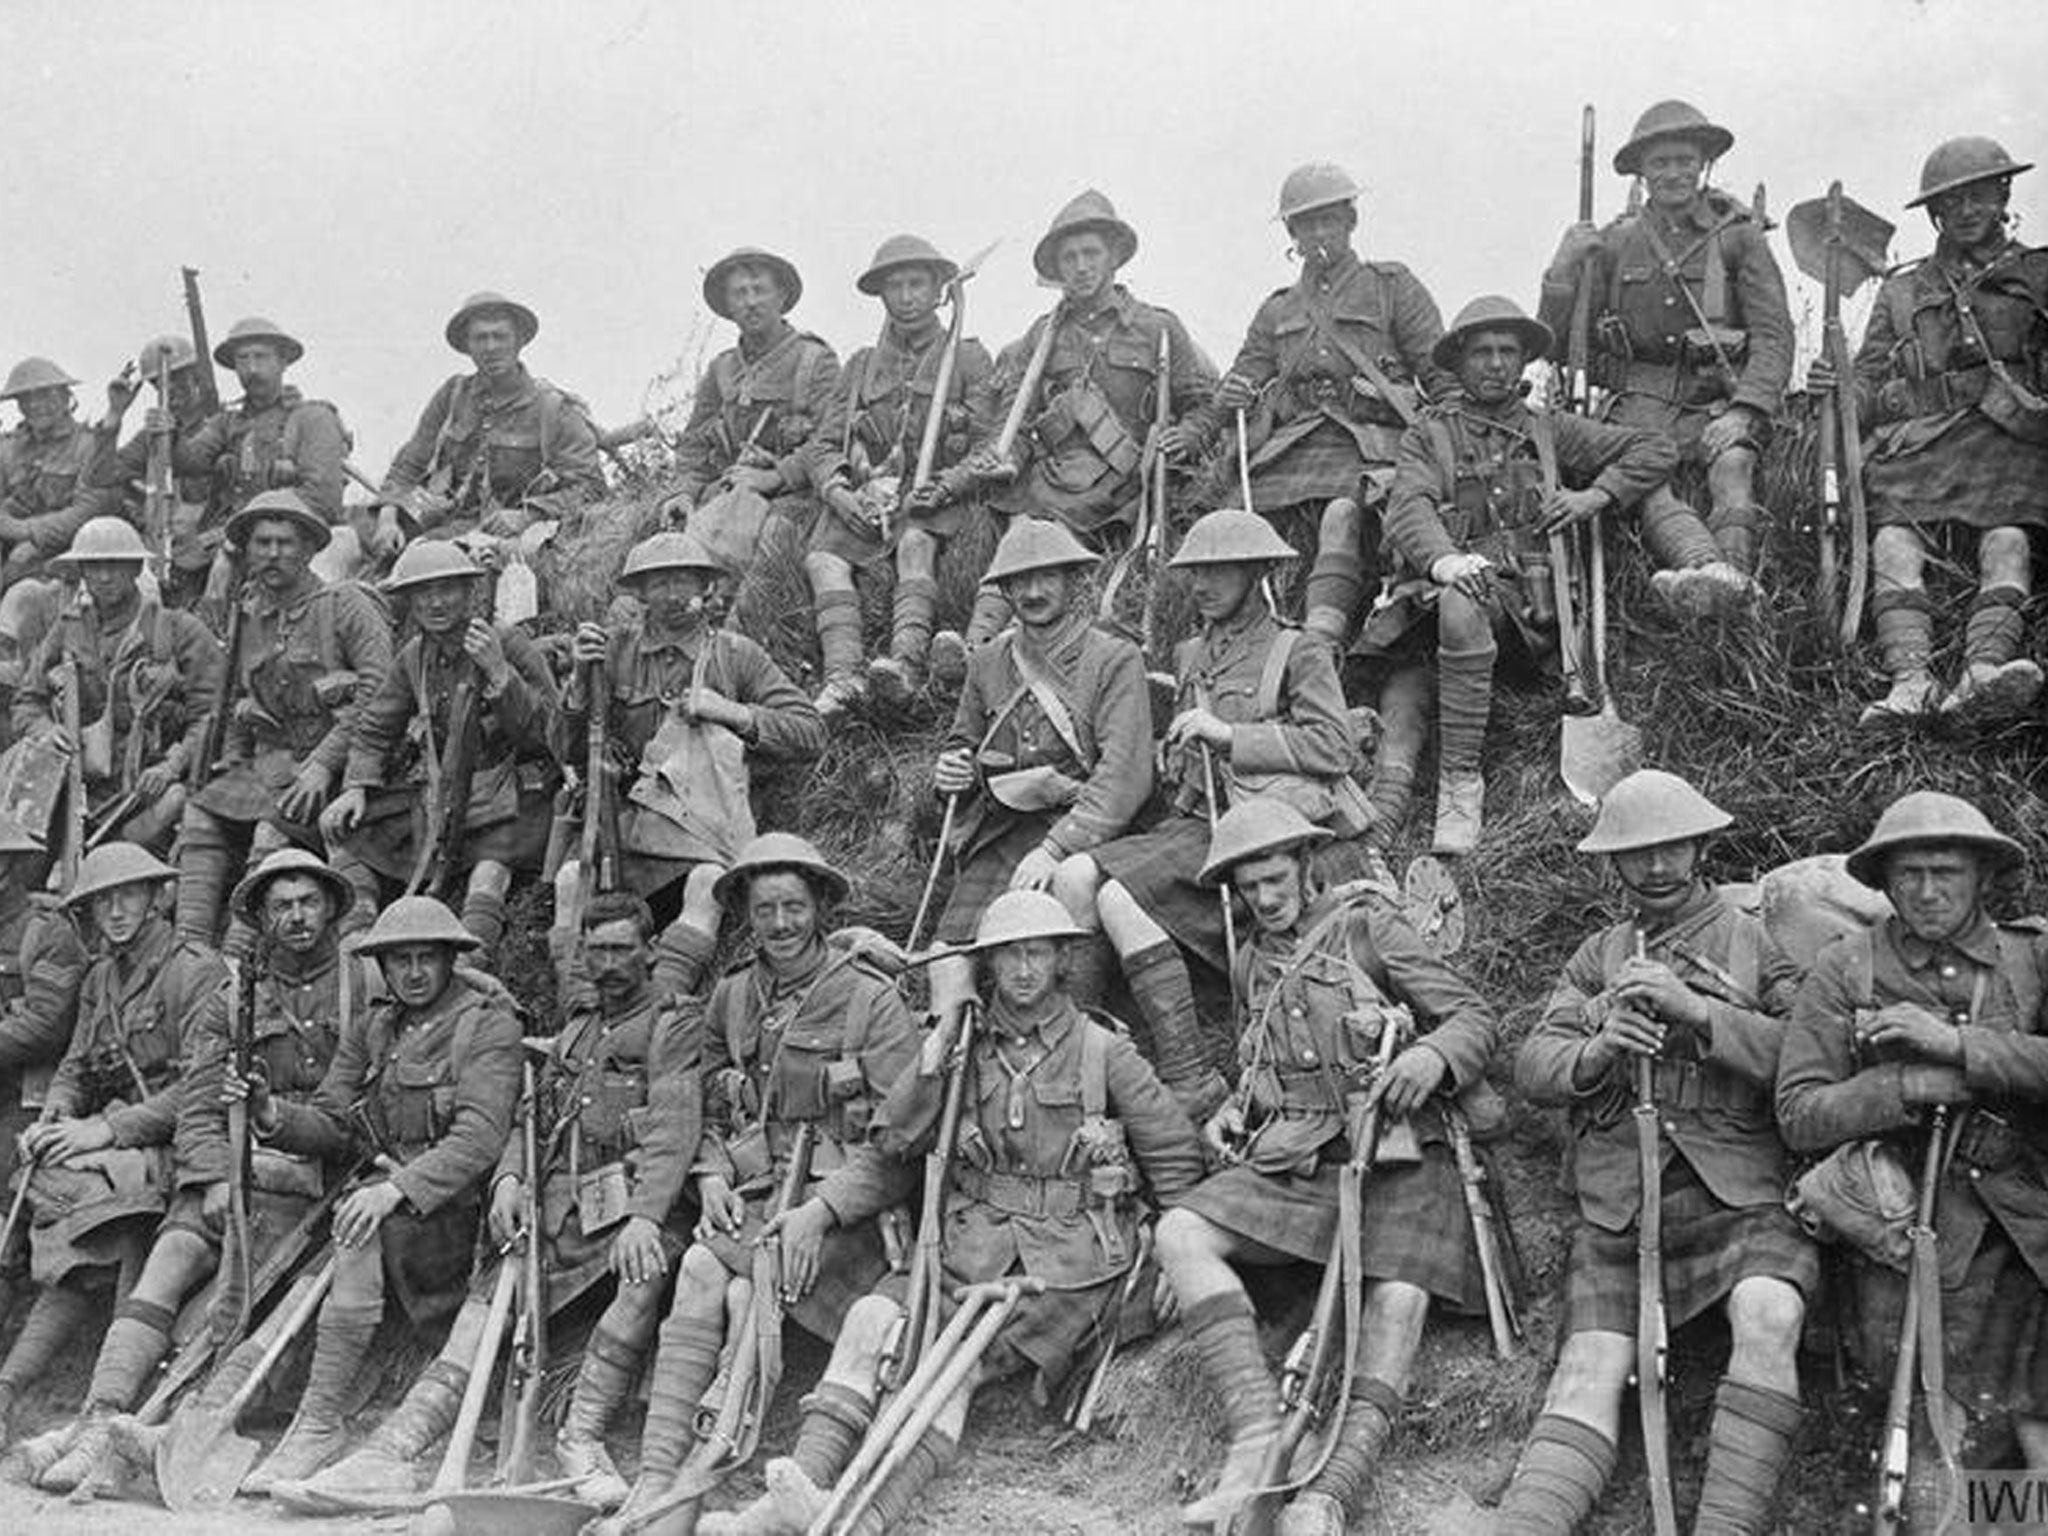 Gordon Highlanders rest at the roadside, July 1916. They carry the tools of their trade - the Short Magazine Lee-Enfield bolt action rifle, and the spade